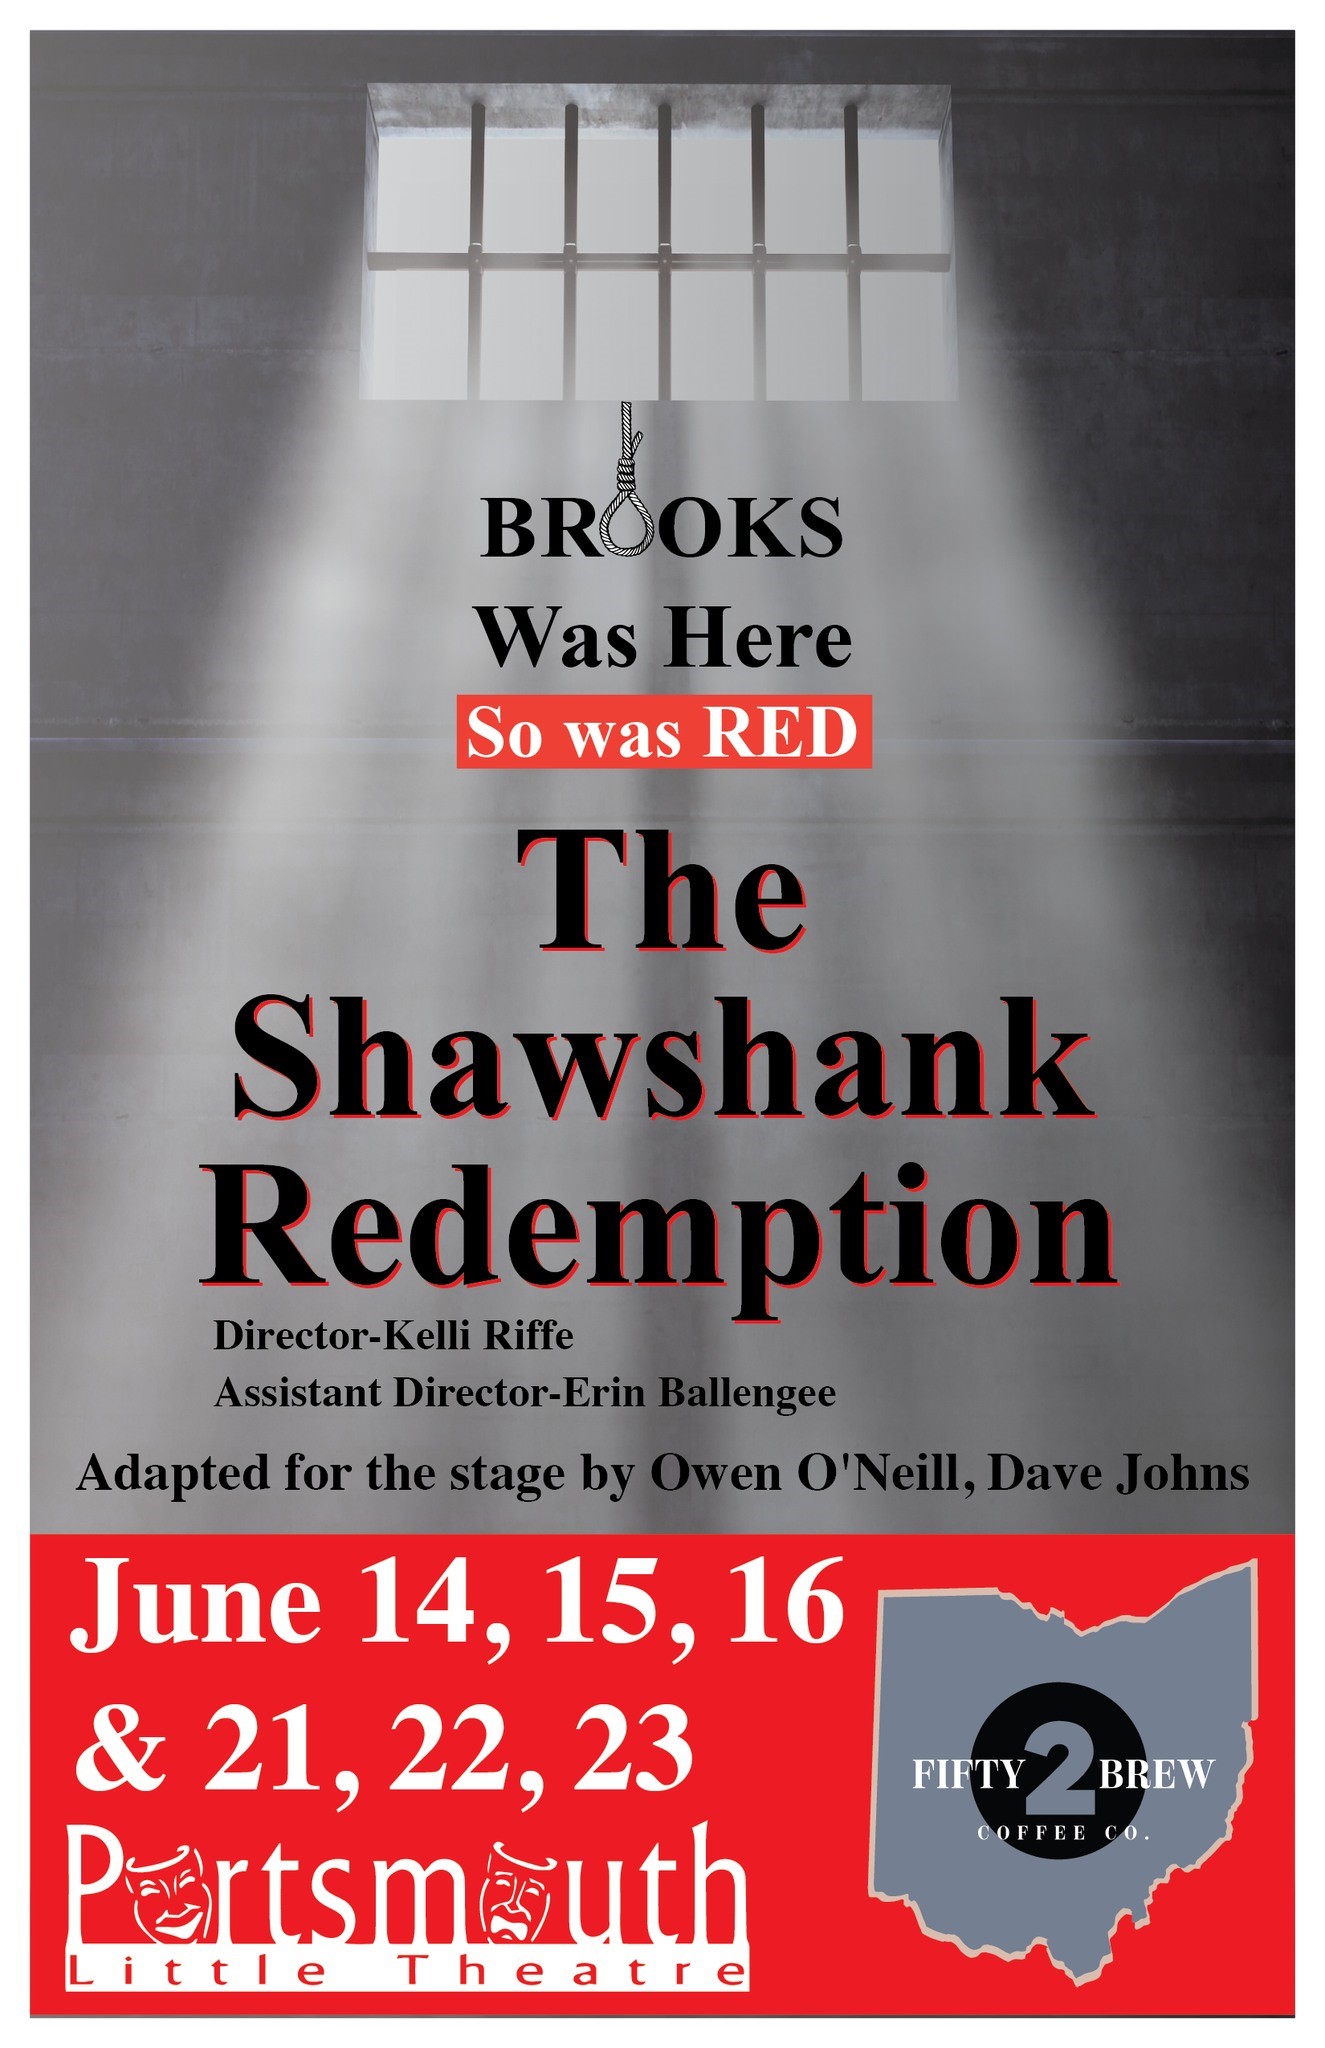 Shawshank Redemption  on Jun 21, 19:30@Portsmouth Little Theatre - Pick a seat, Buy tickets and Get information on Portsmouth Little Theatre 